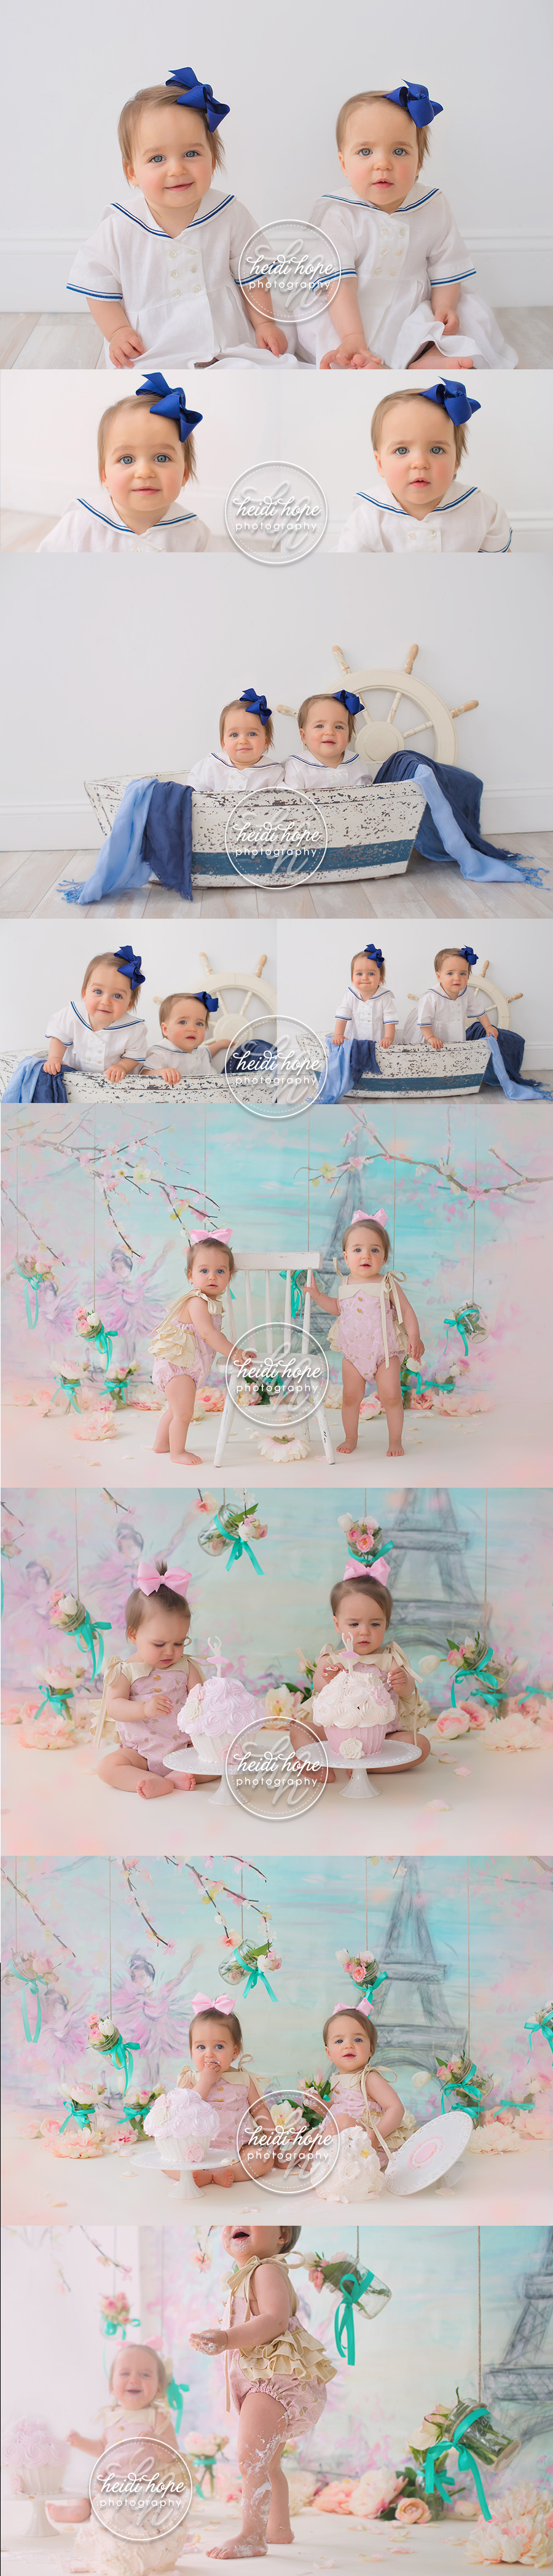 spring-time-in-paris-eiffle-tower-cakesmash-for-twin-sisters-first-birthday